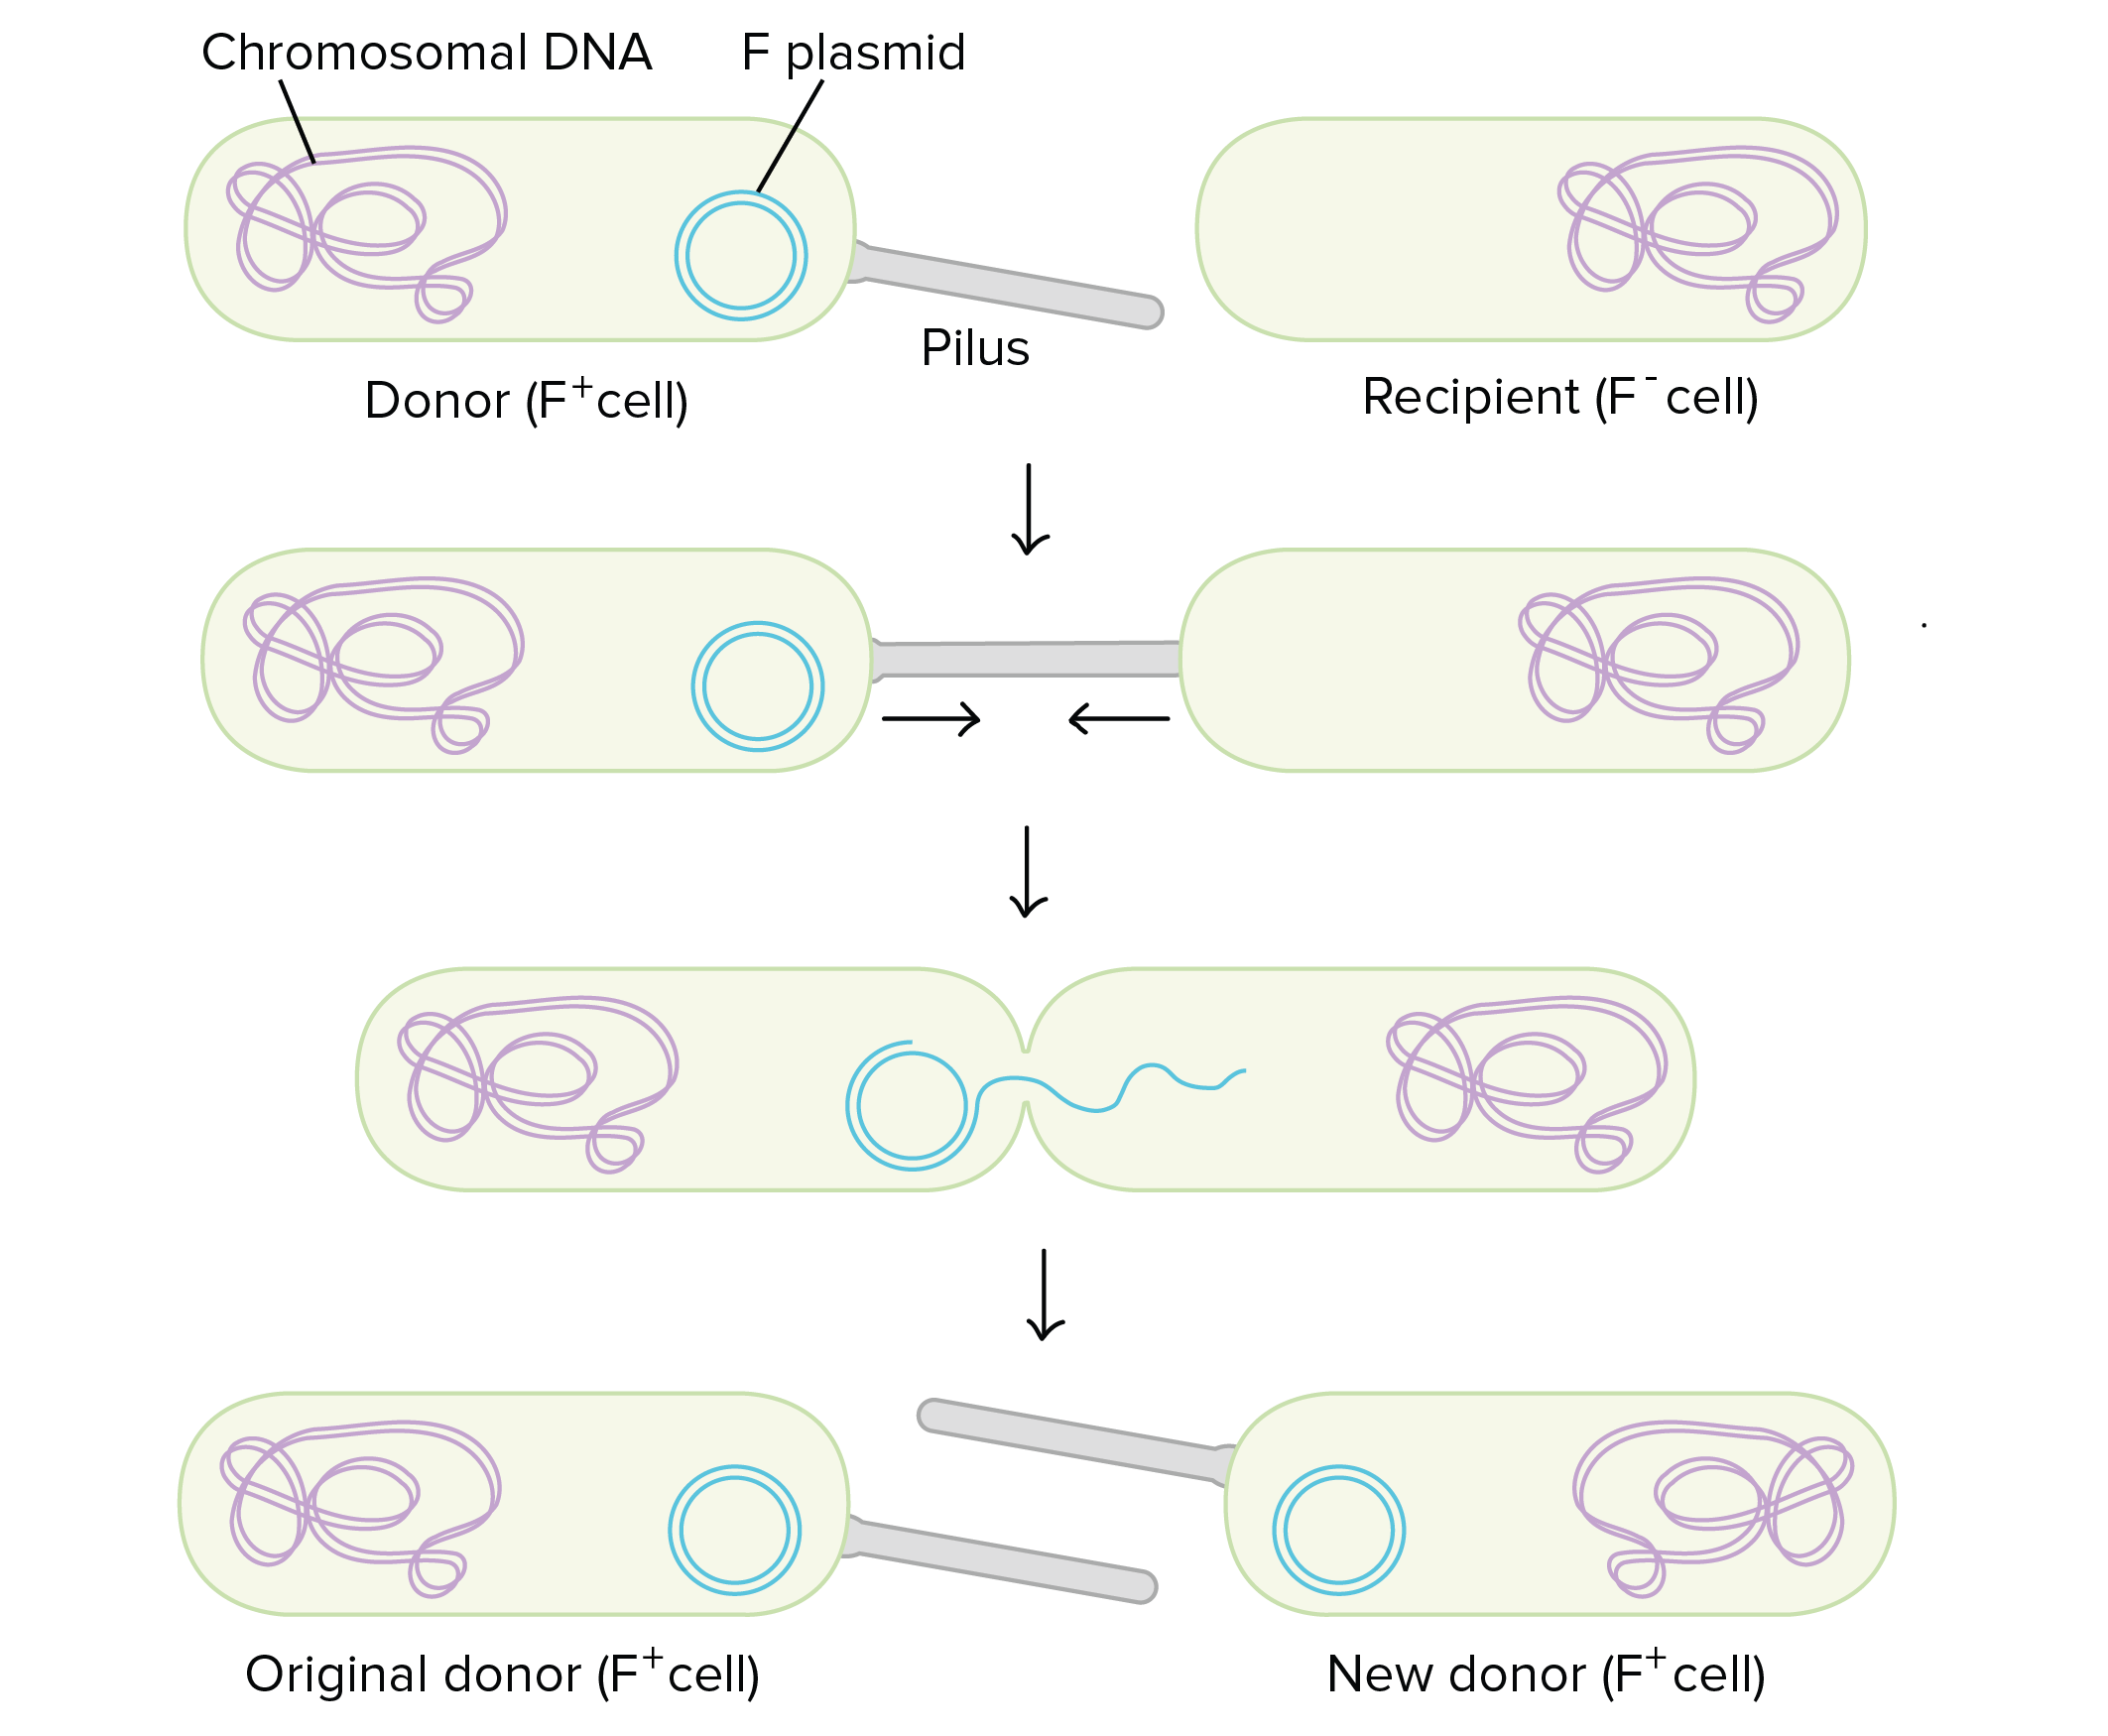 1. An F+ donor cell contains its chromosomal DNA and  an F plasmid. It has a rodlike pilus. A recipient F- cell has only a chromosome and no F plasmid.

2. The donor cell uses its pilus to attach to the recipient cell, and the two cells are pulled together.

3. A channel forms between the cytoplasms of the two cells, and a single strand of the F plasmid is fed through. 

4. Both of the cells now have an F plasmid and are F+. The former recipient cell is now a new donor and can form a pilus.